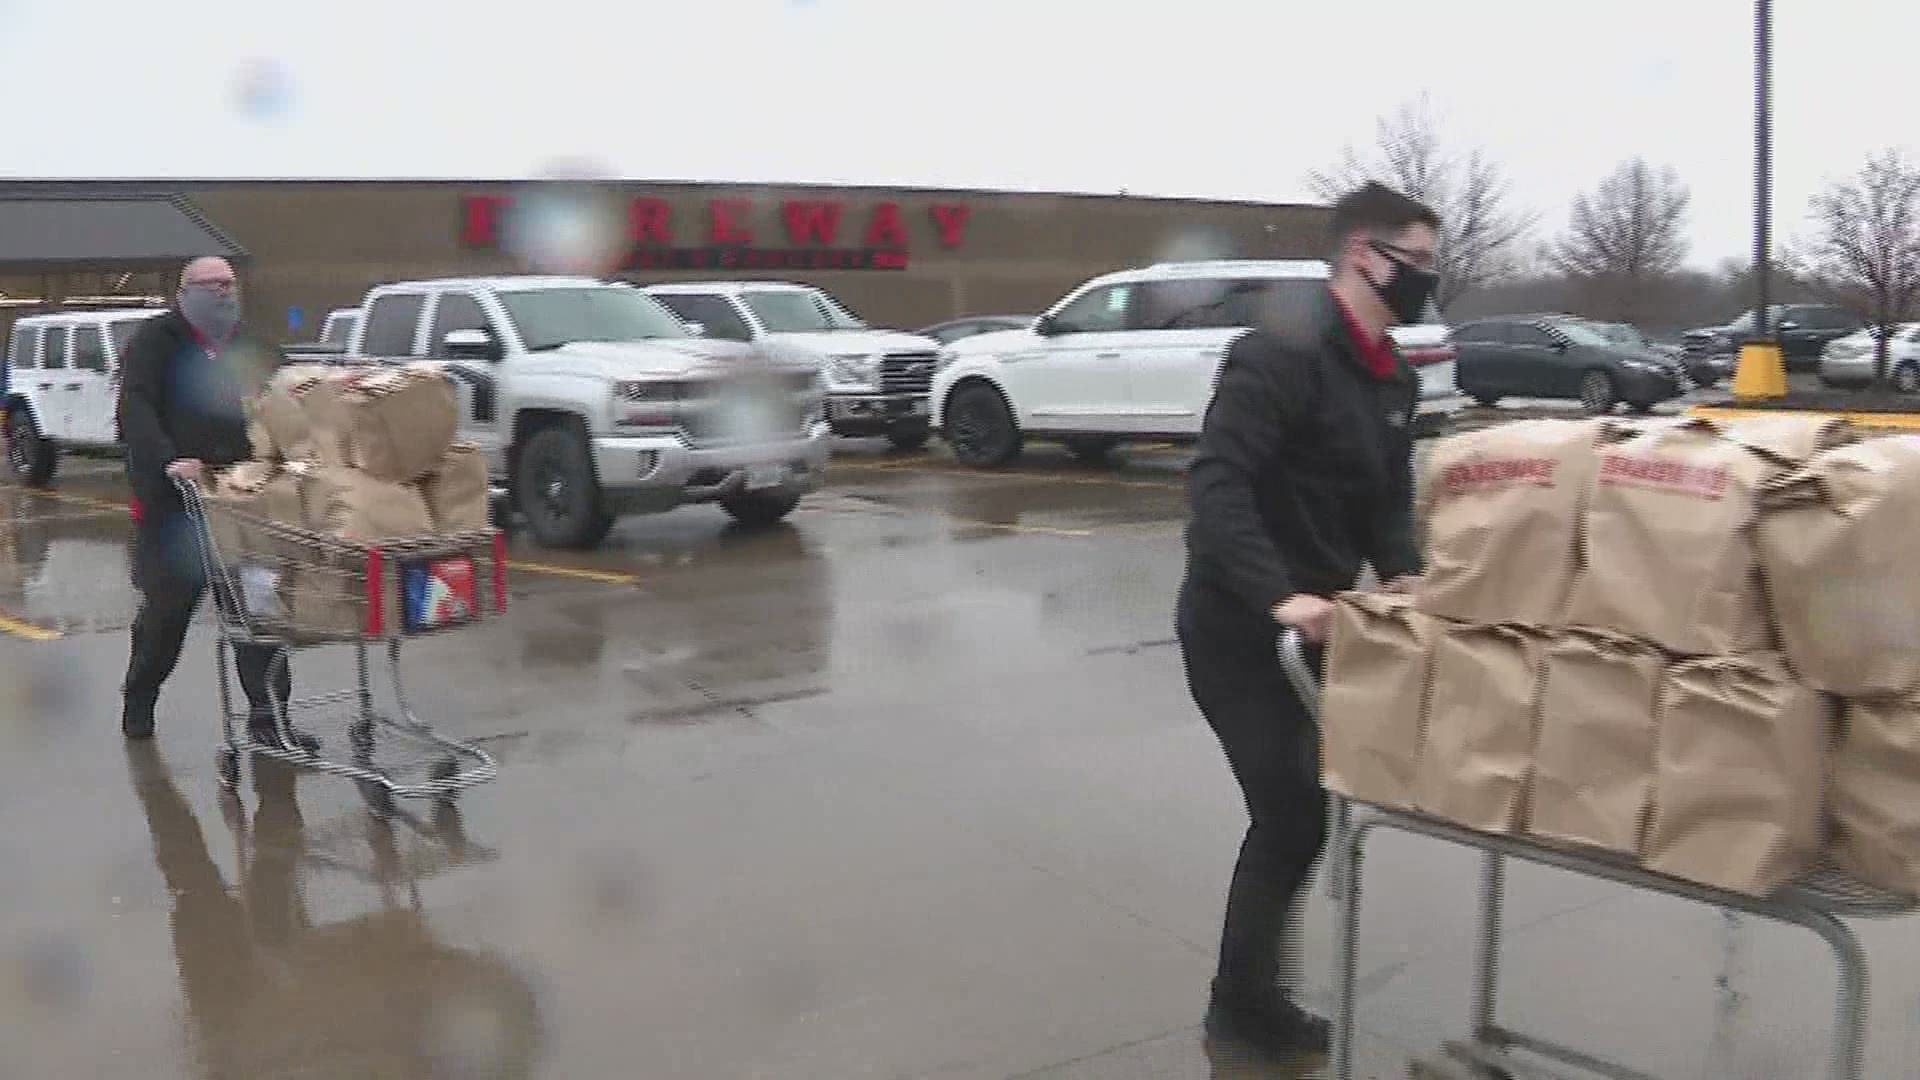 The toy and food drive organized by Muscatine businesses collected approximately $10,000 worth of food for the Muscatine County Salvation Army.